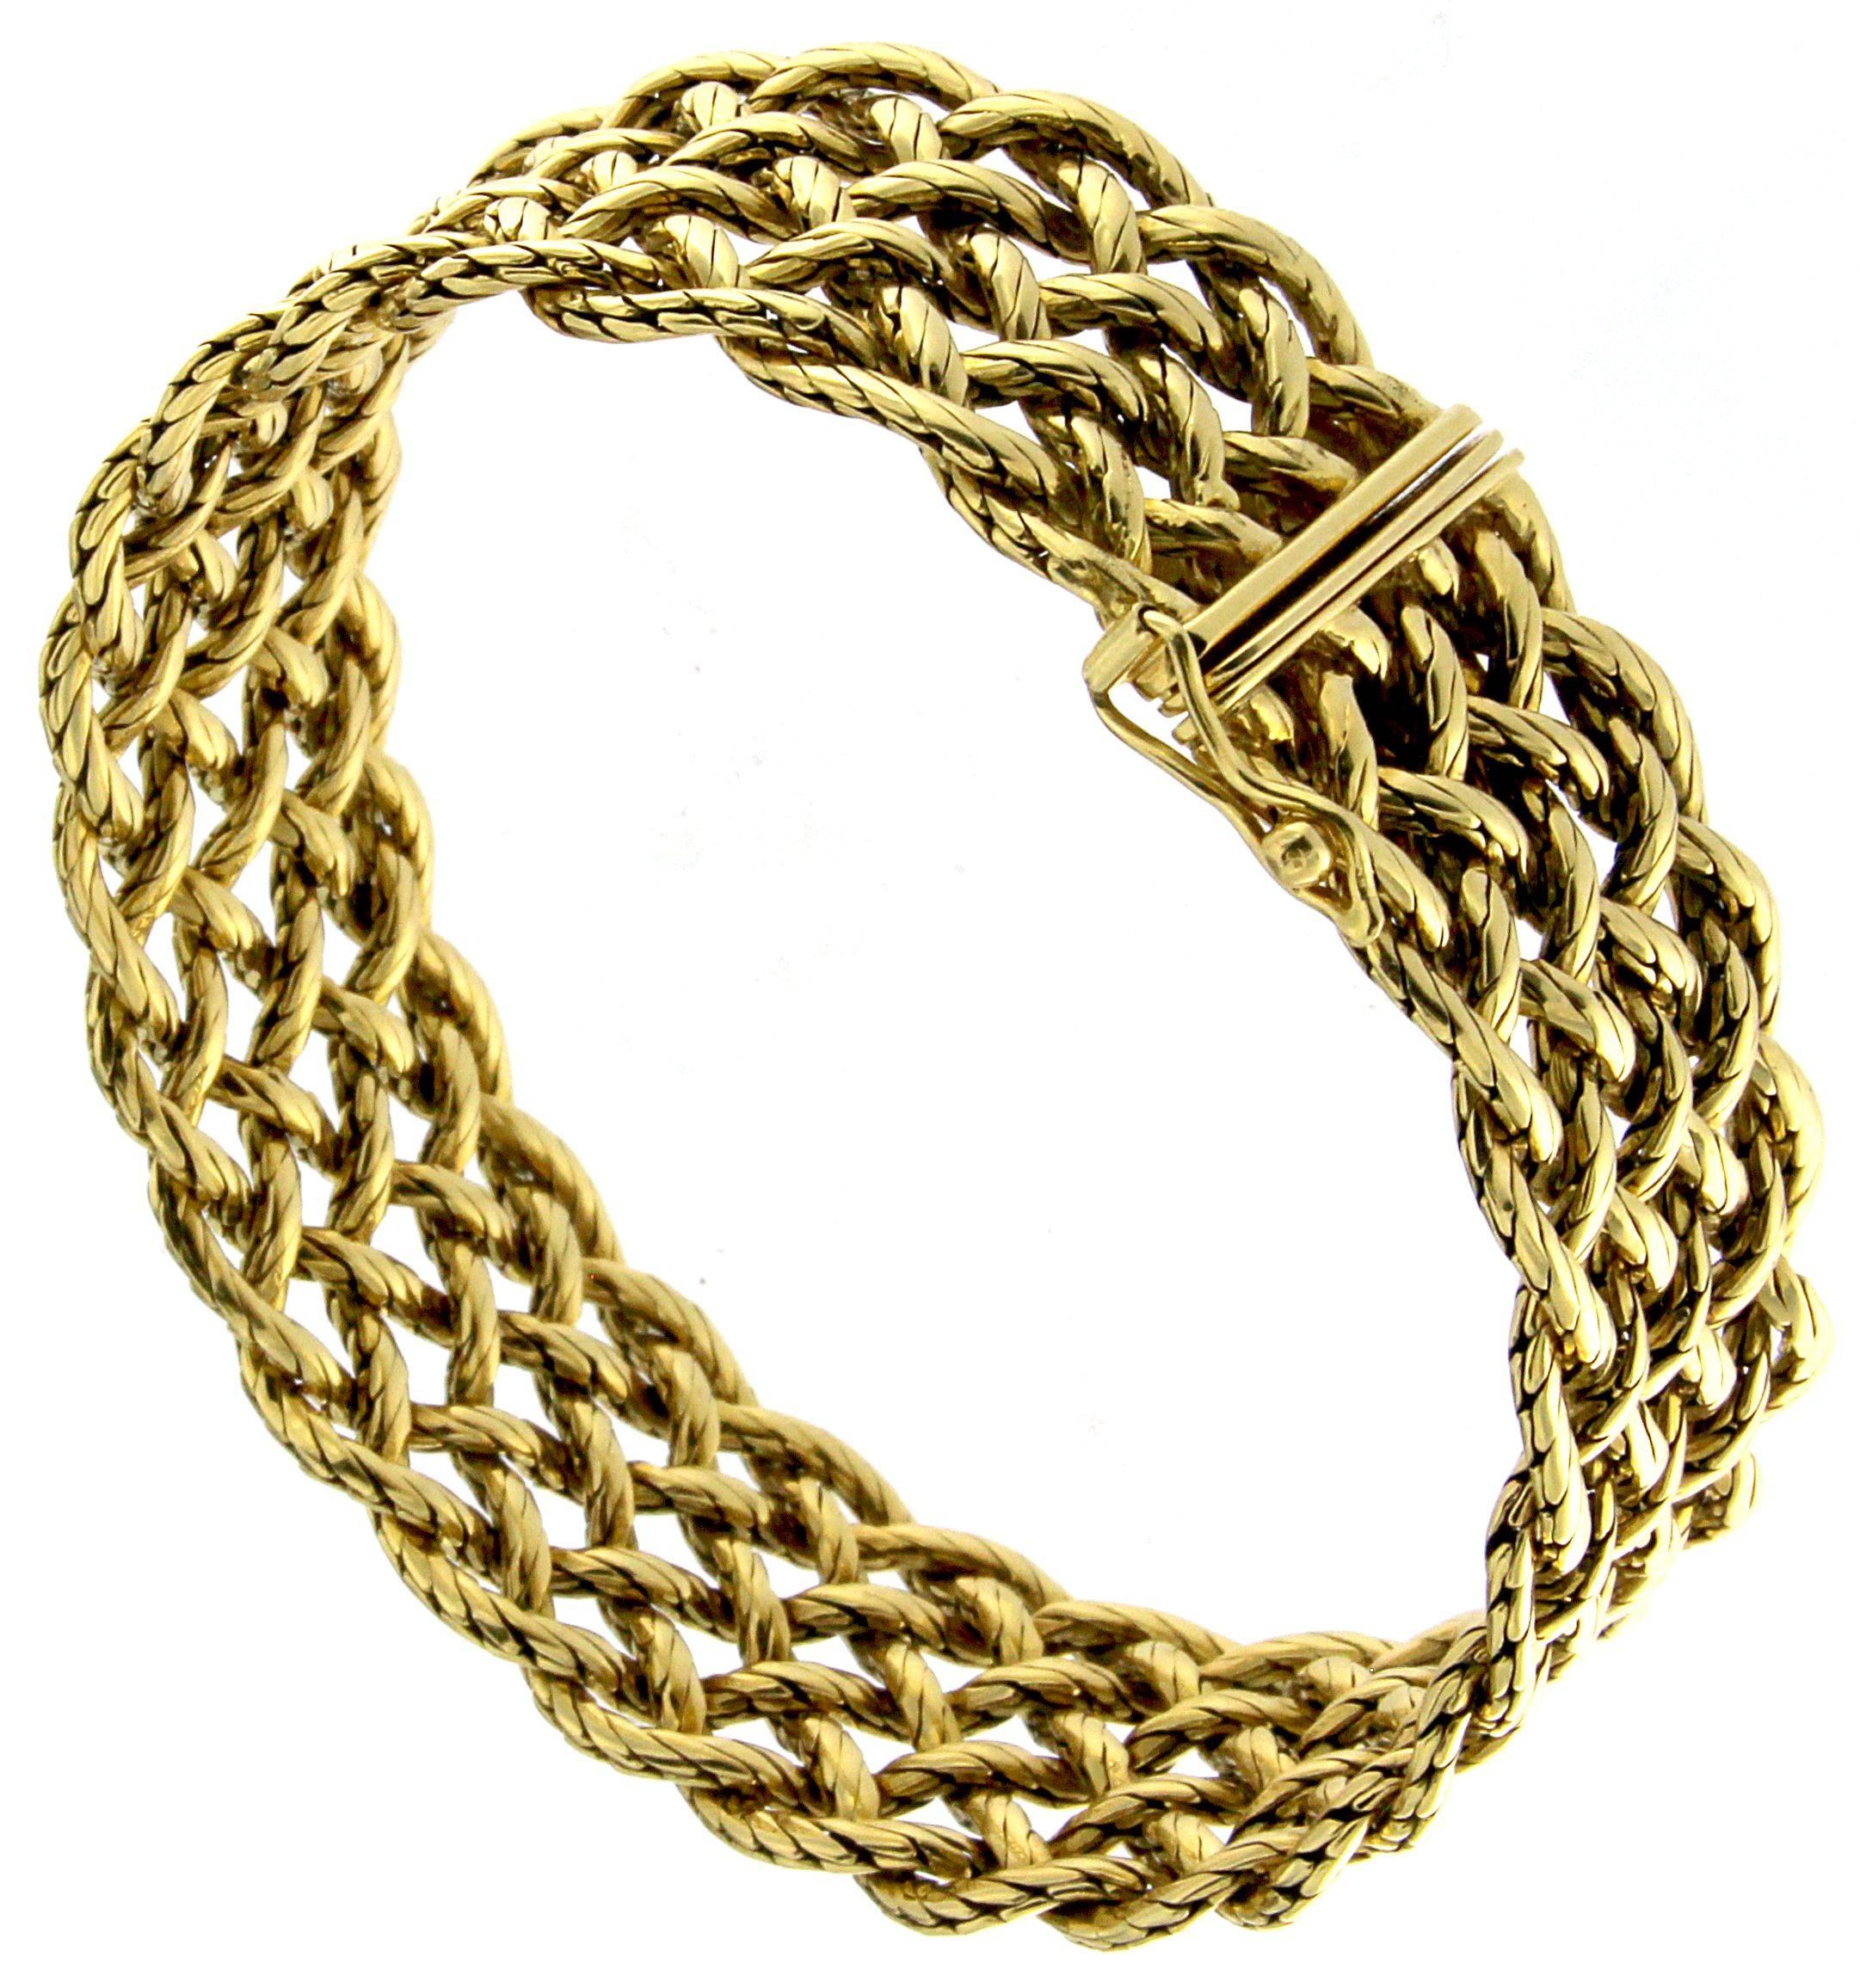 Medium size mesh bracelet in yellow gold
8 wires 18 KT GOLD mm. 20 linear with ratchet closure with  